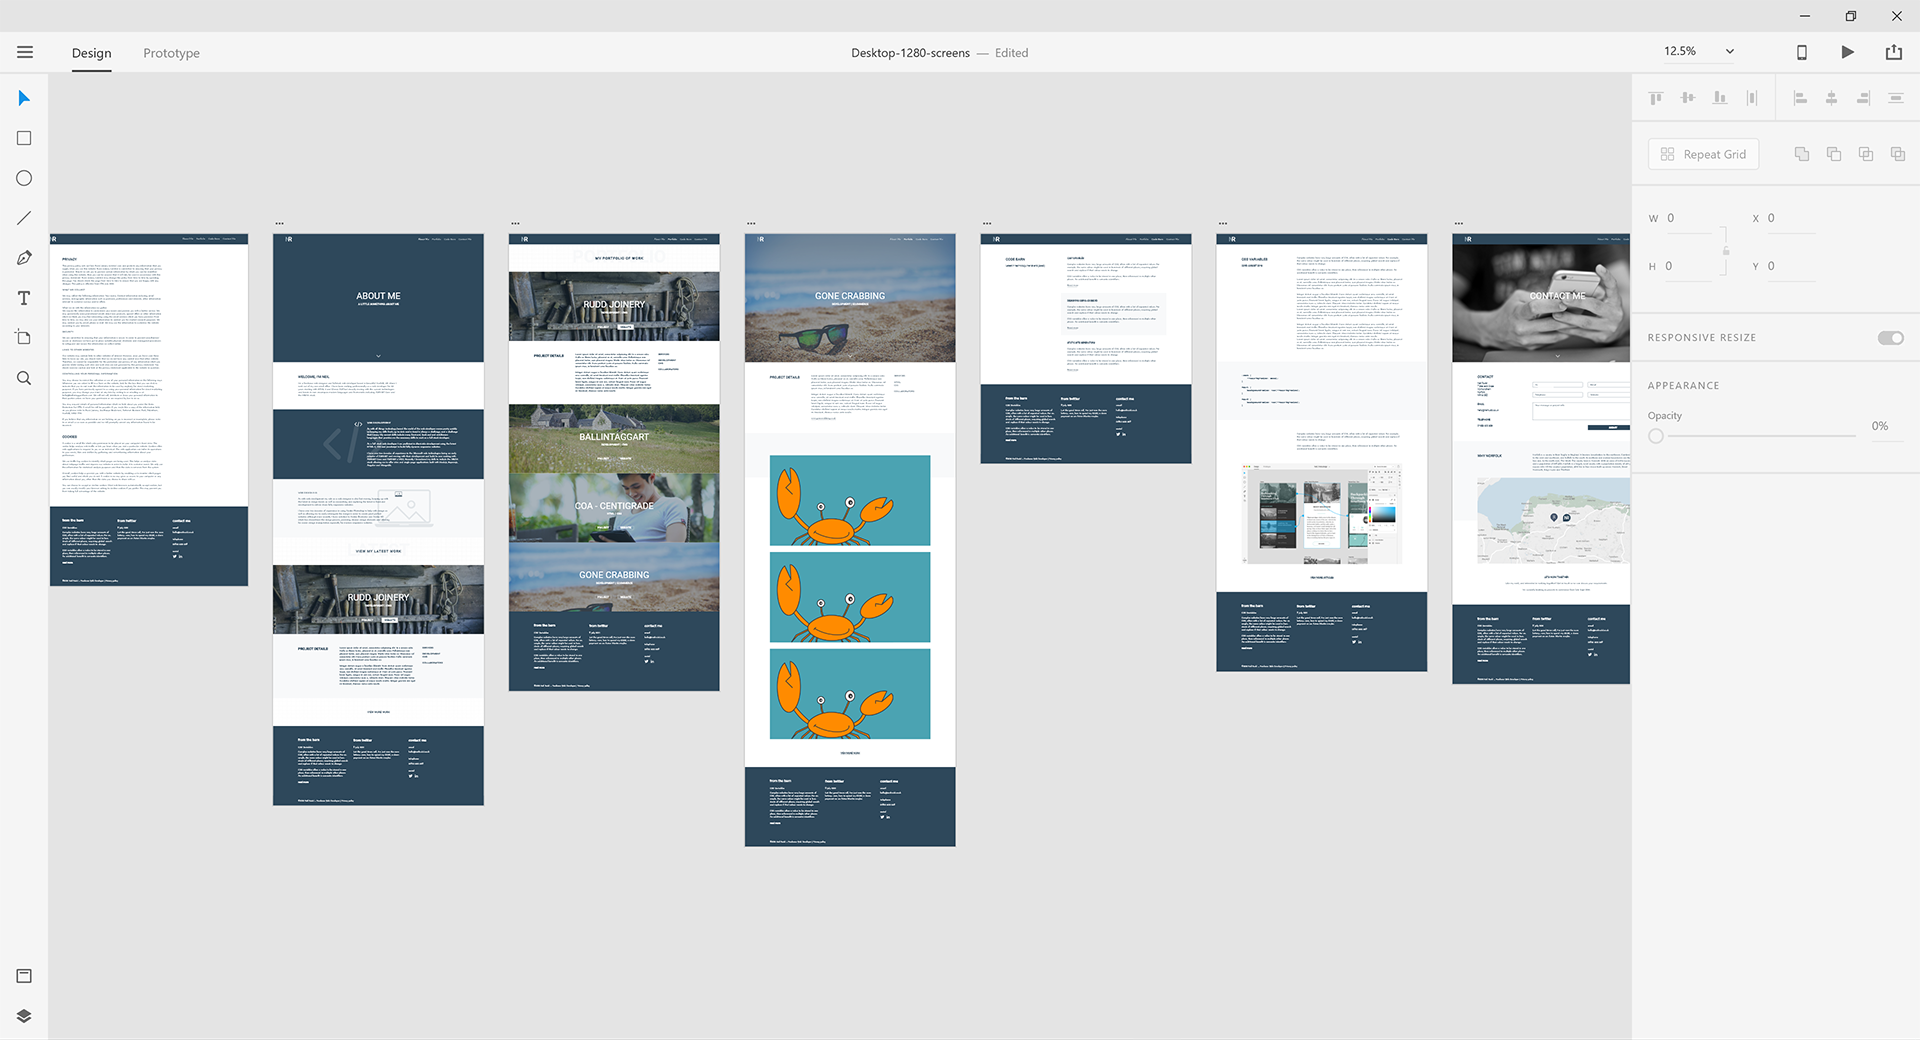 Screen shot of Adobe XD showing the other content pages that will be required